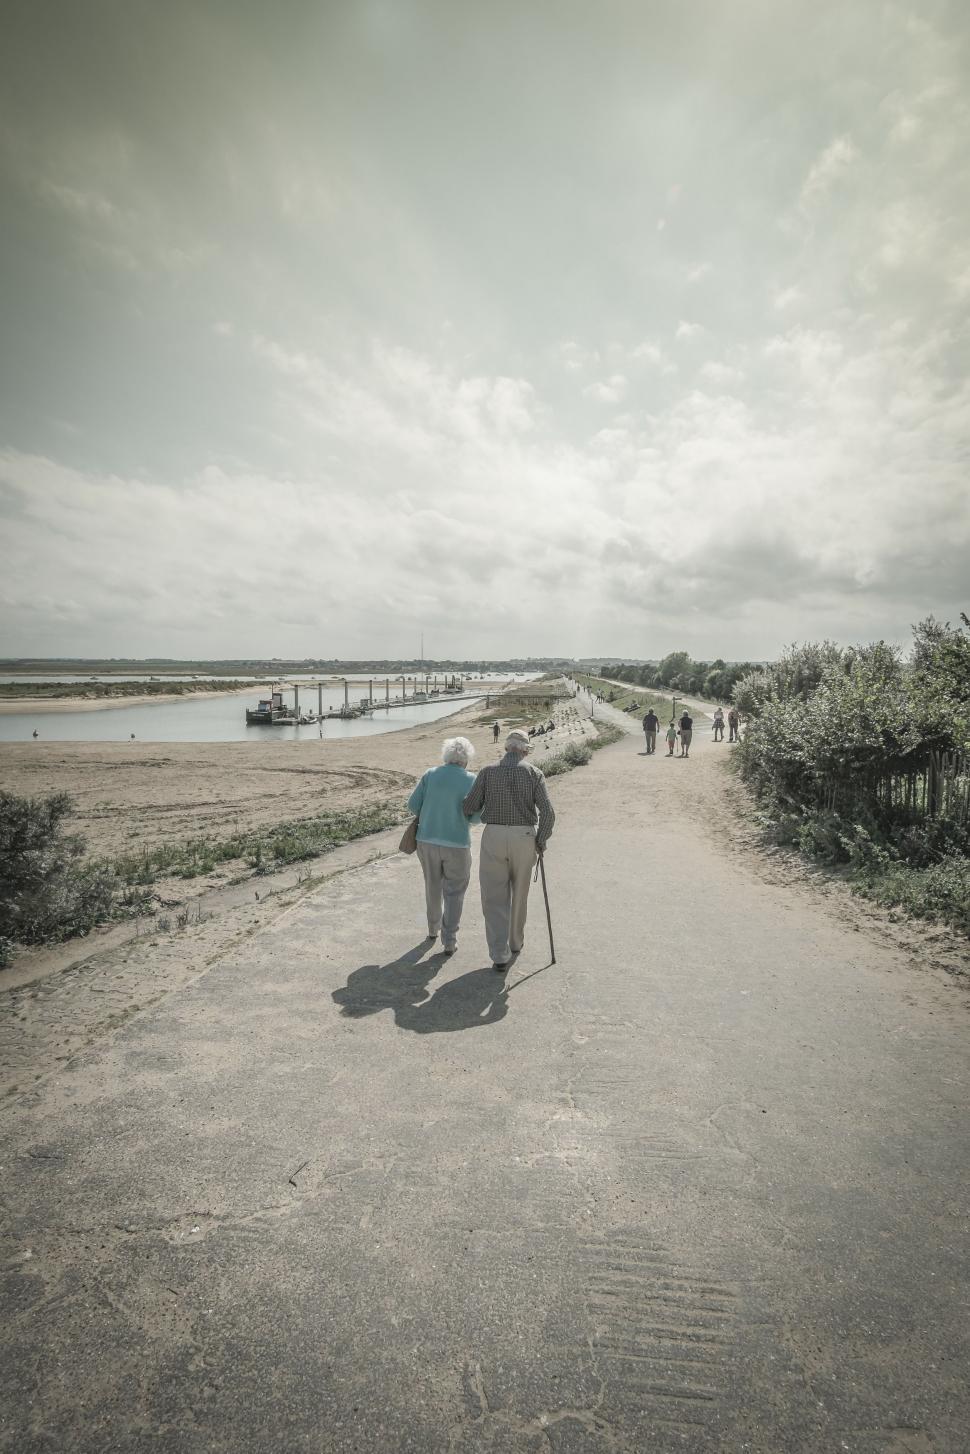 Free Image of Two People Walking Down a Dirt Road 